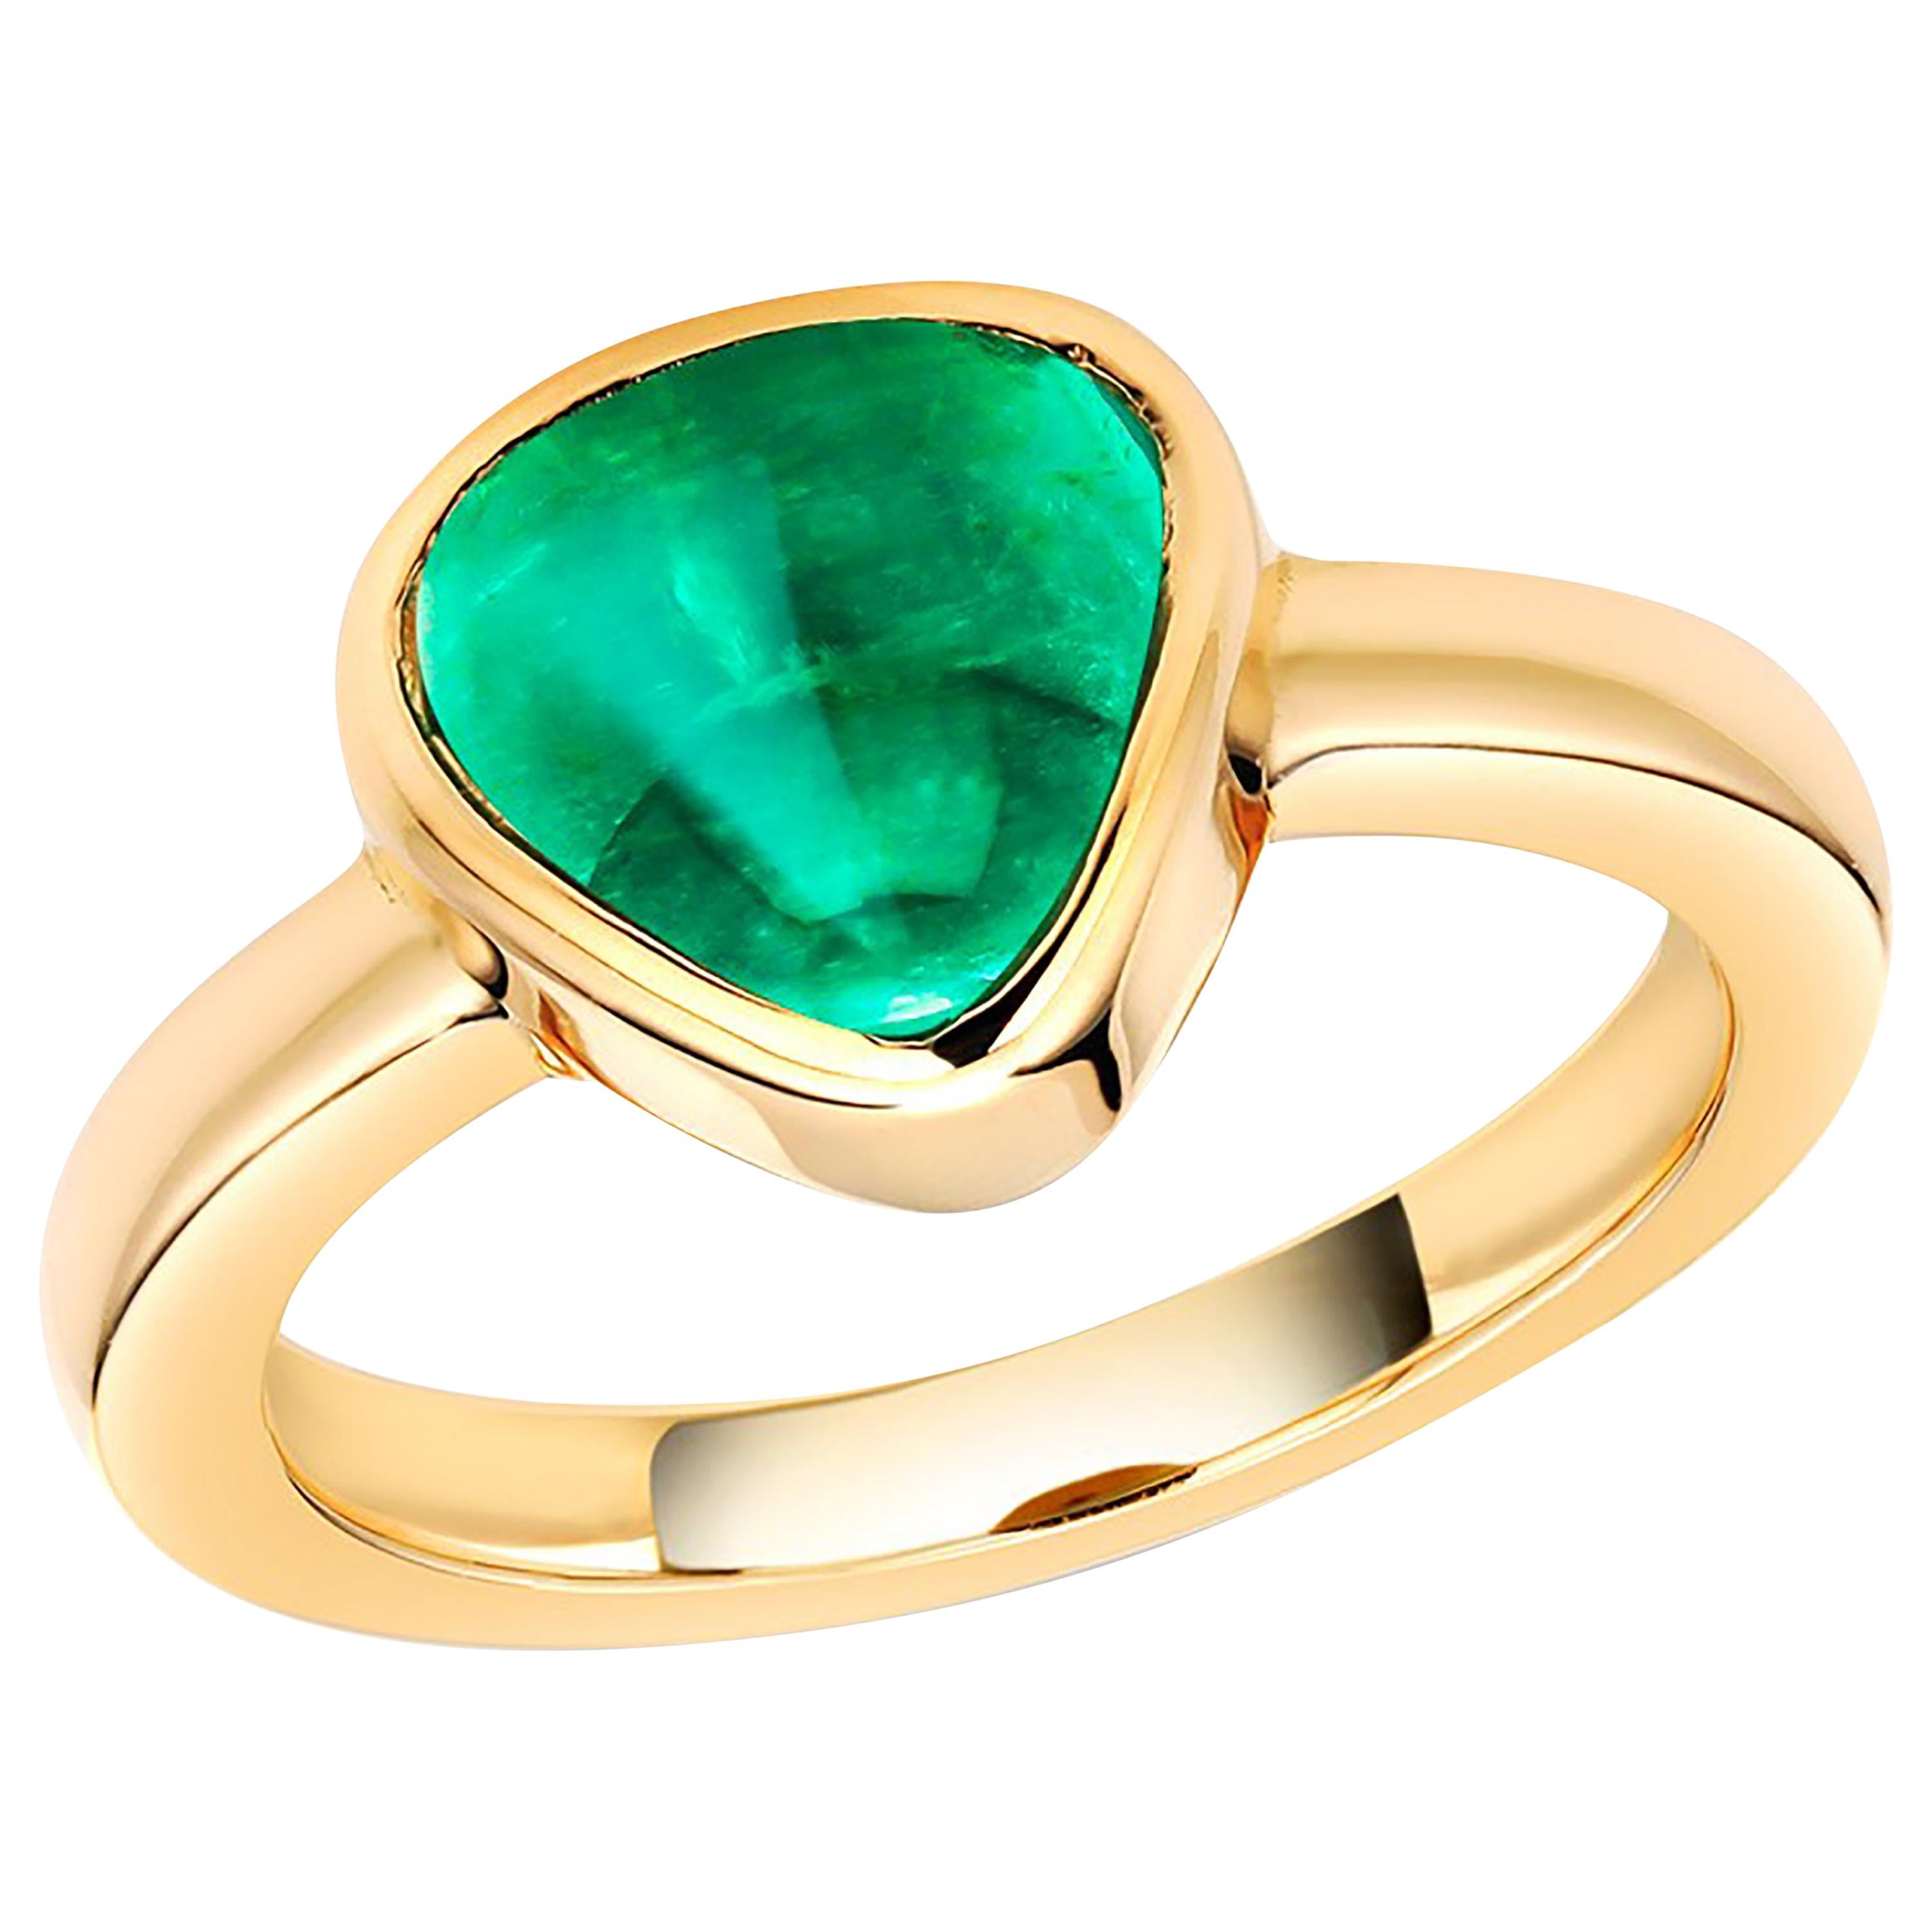 Cabochon Colombia Emerald Raised Dome Yellow Gold Cocktail Ring 